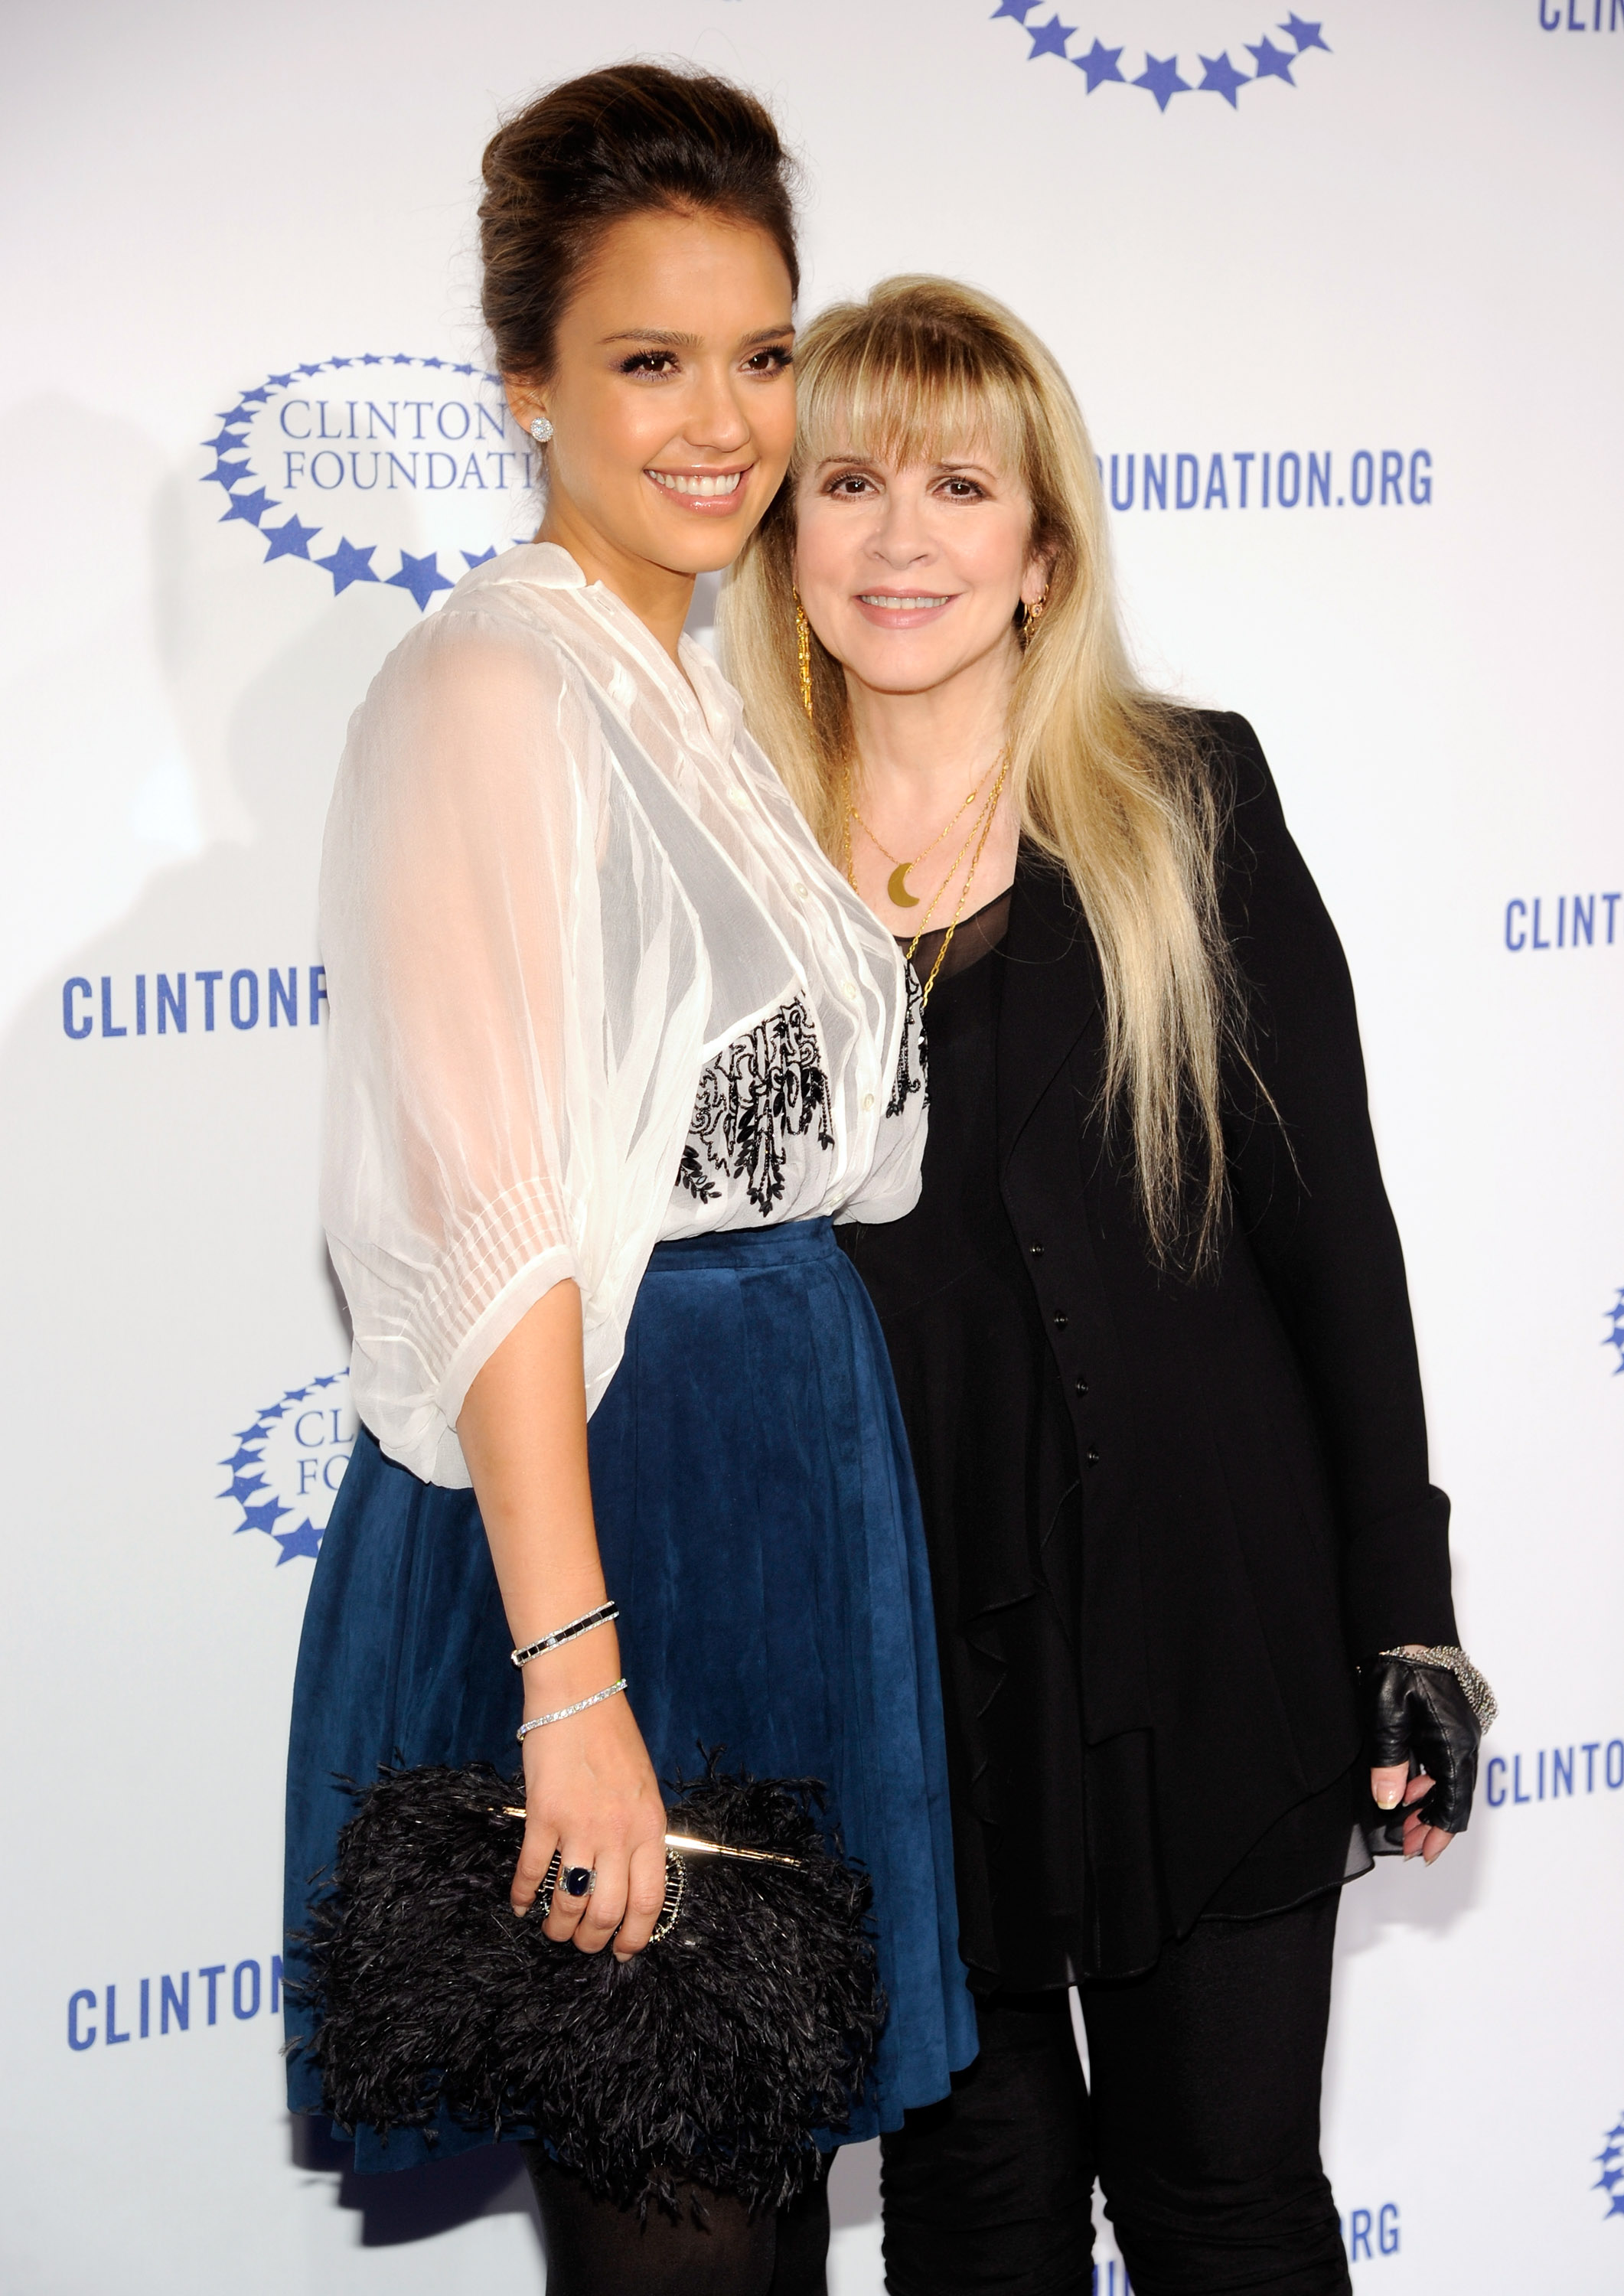 Jessica Alba arrives to the Clinton Foundation's _A Decade of Difference_ Gala in Beverly Hills on 14th October 2011